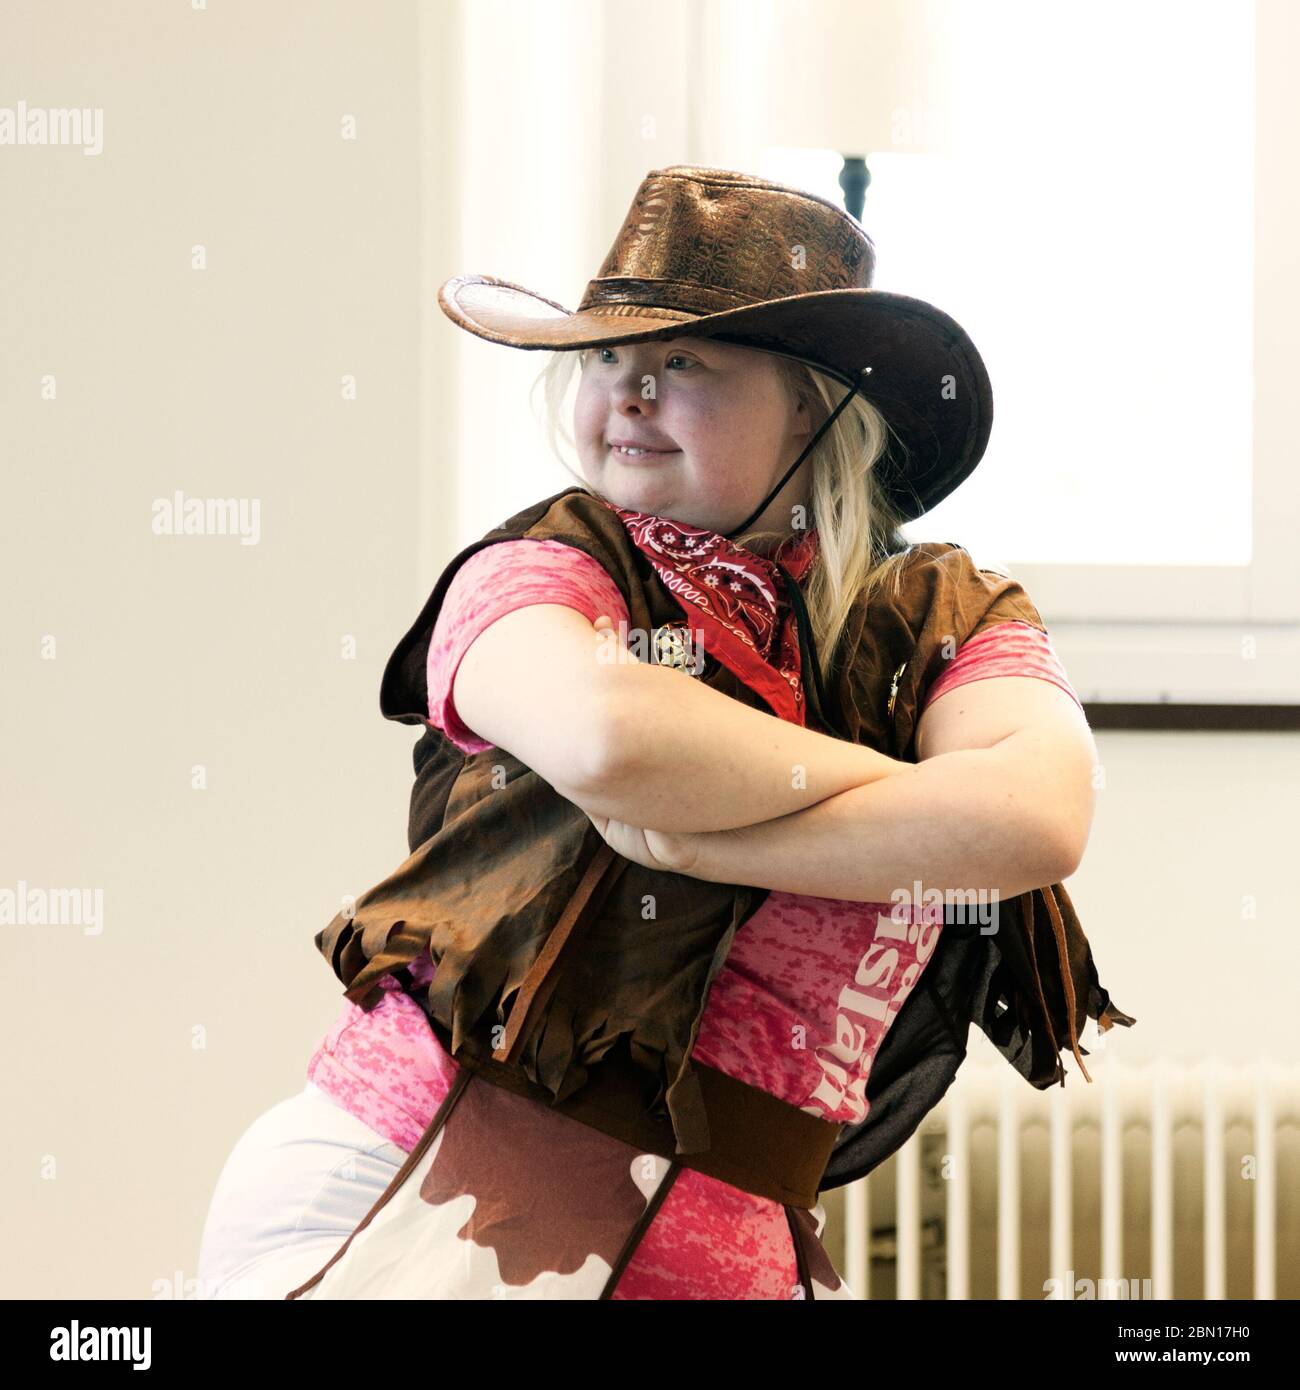 Umea, Norrland Sweden - September 23, 2019: person with special needs dances dressed as cowboy Stock Photo